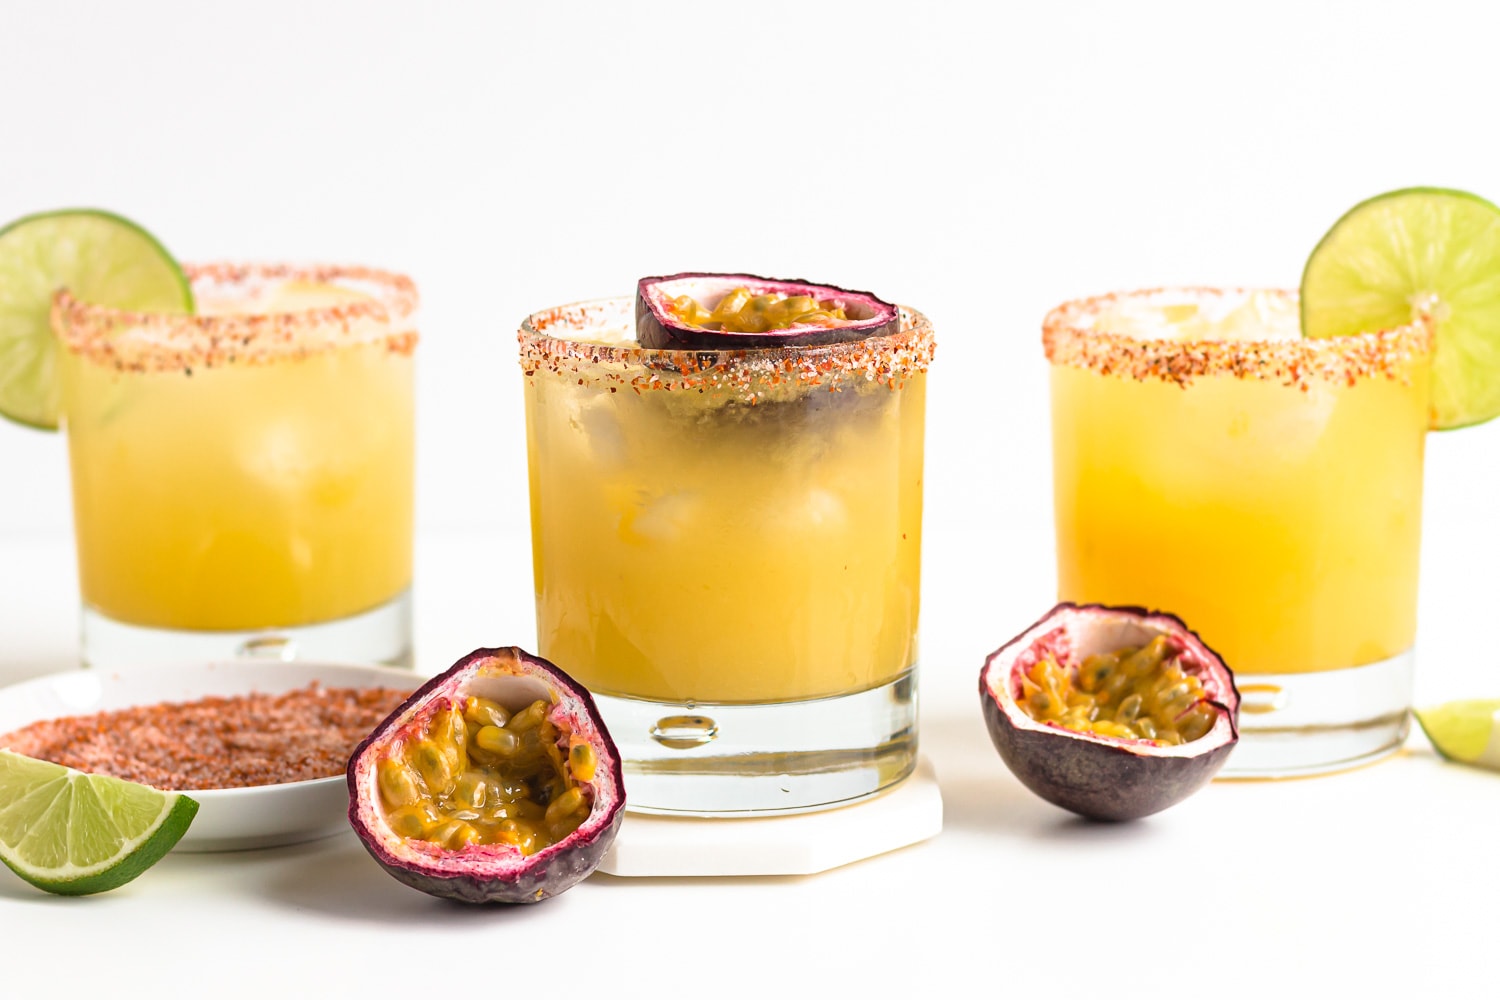 Three garnished glasses of passion fruit margarita cocktails on a white background.